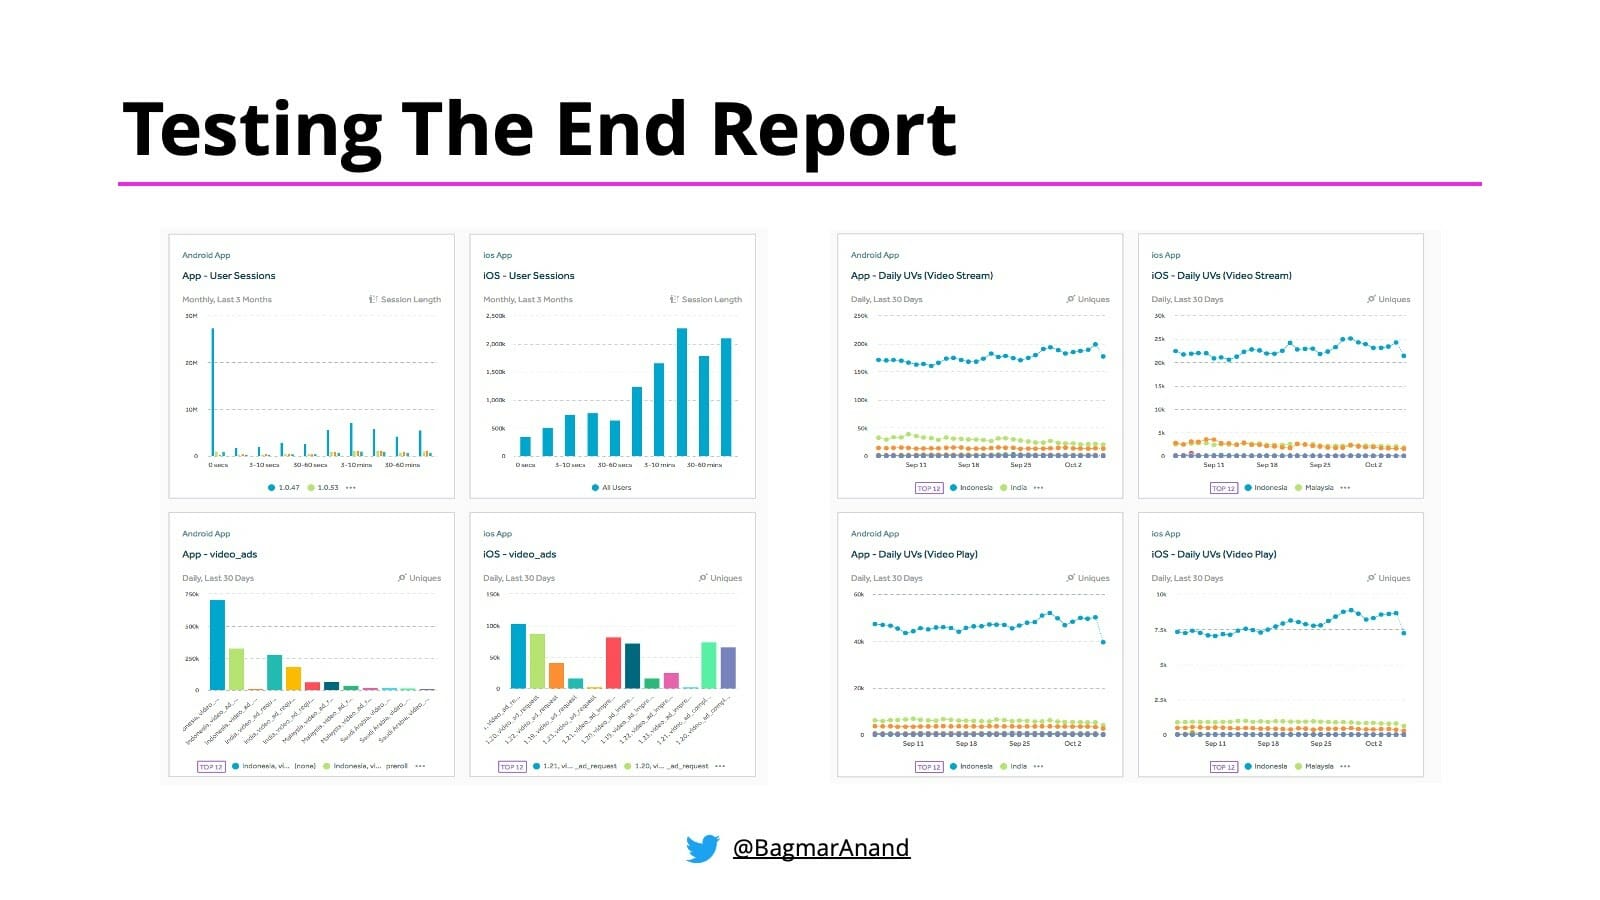 A collection of charts and graphs for Testing the End Report